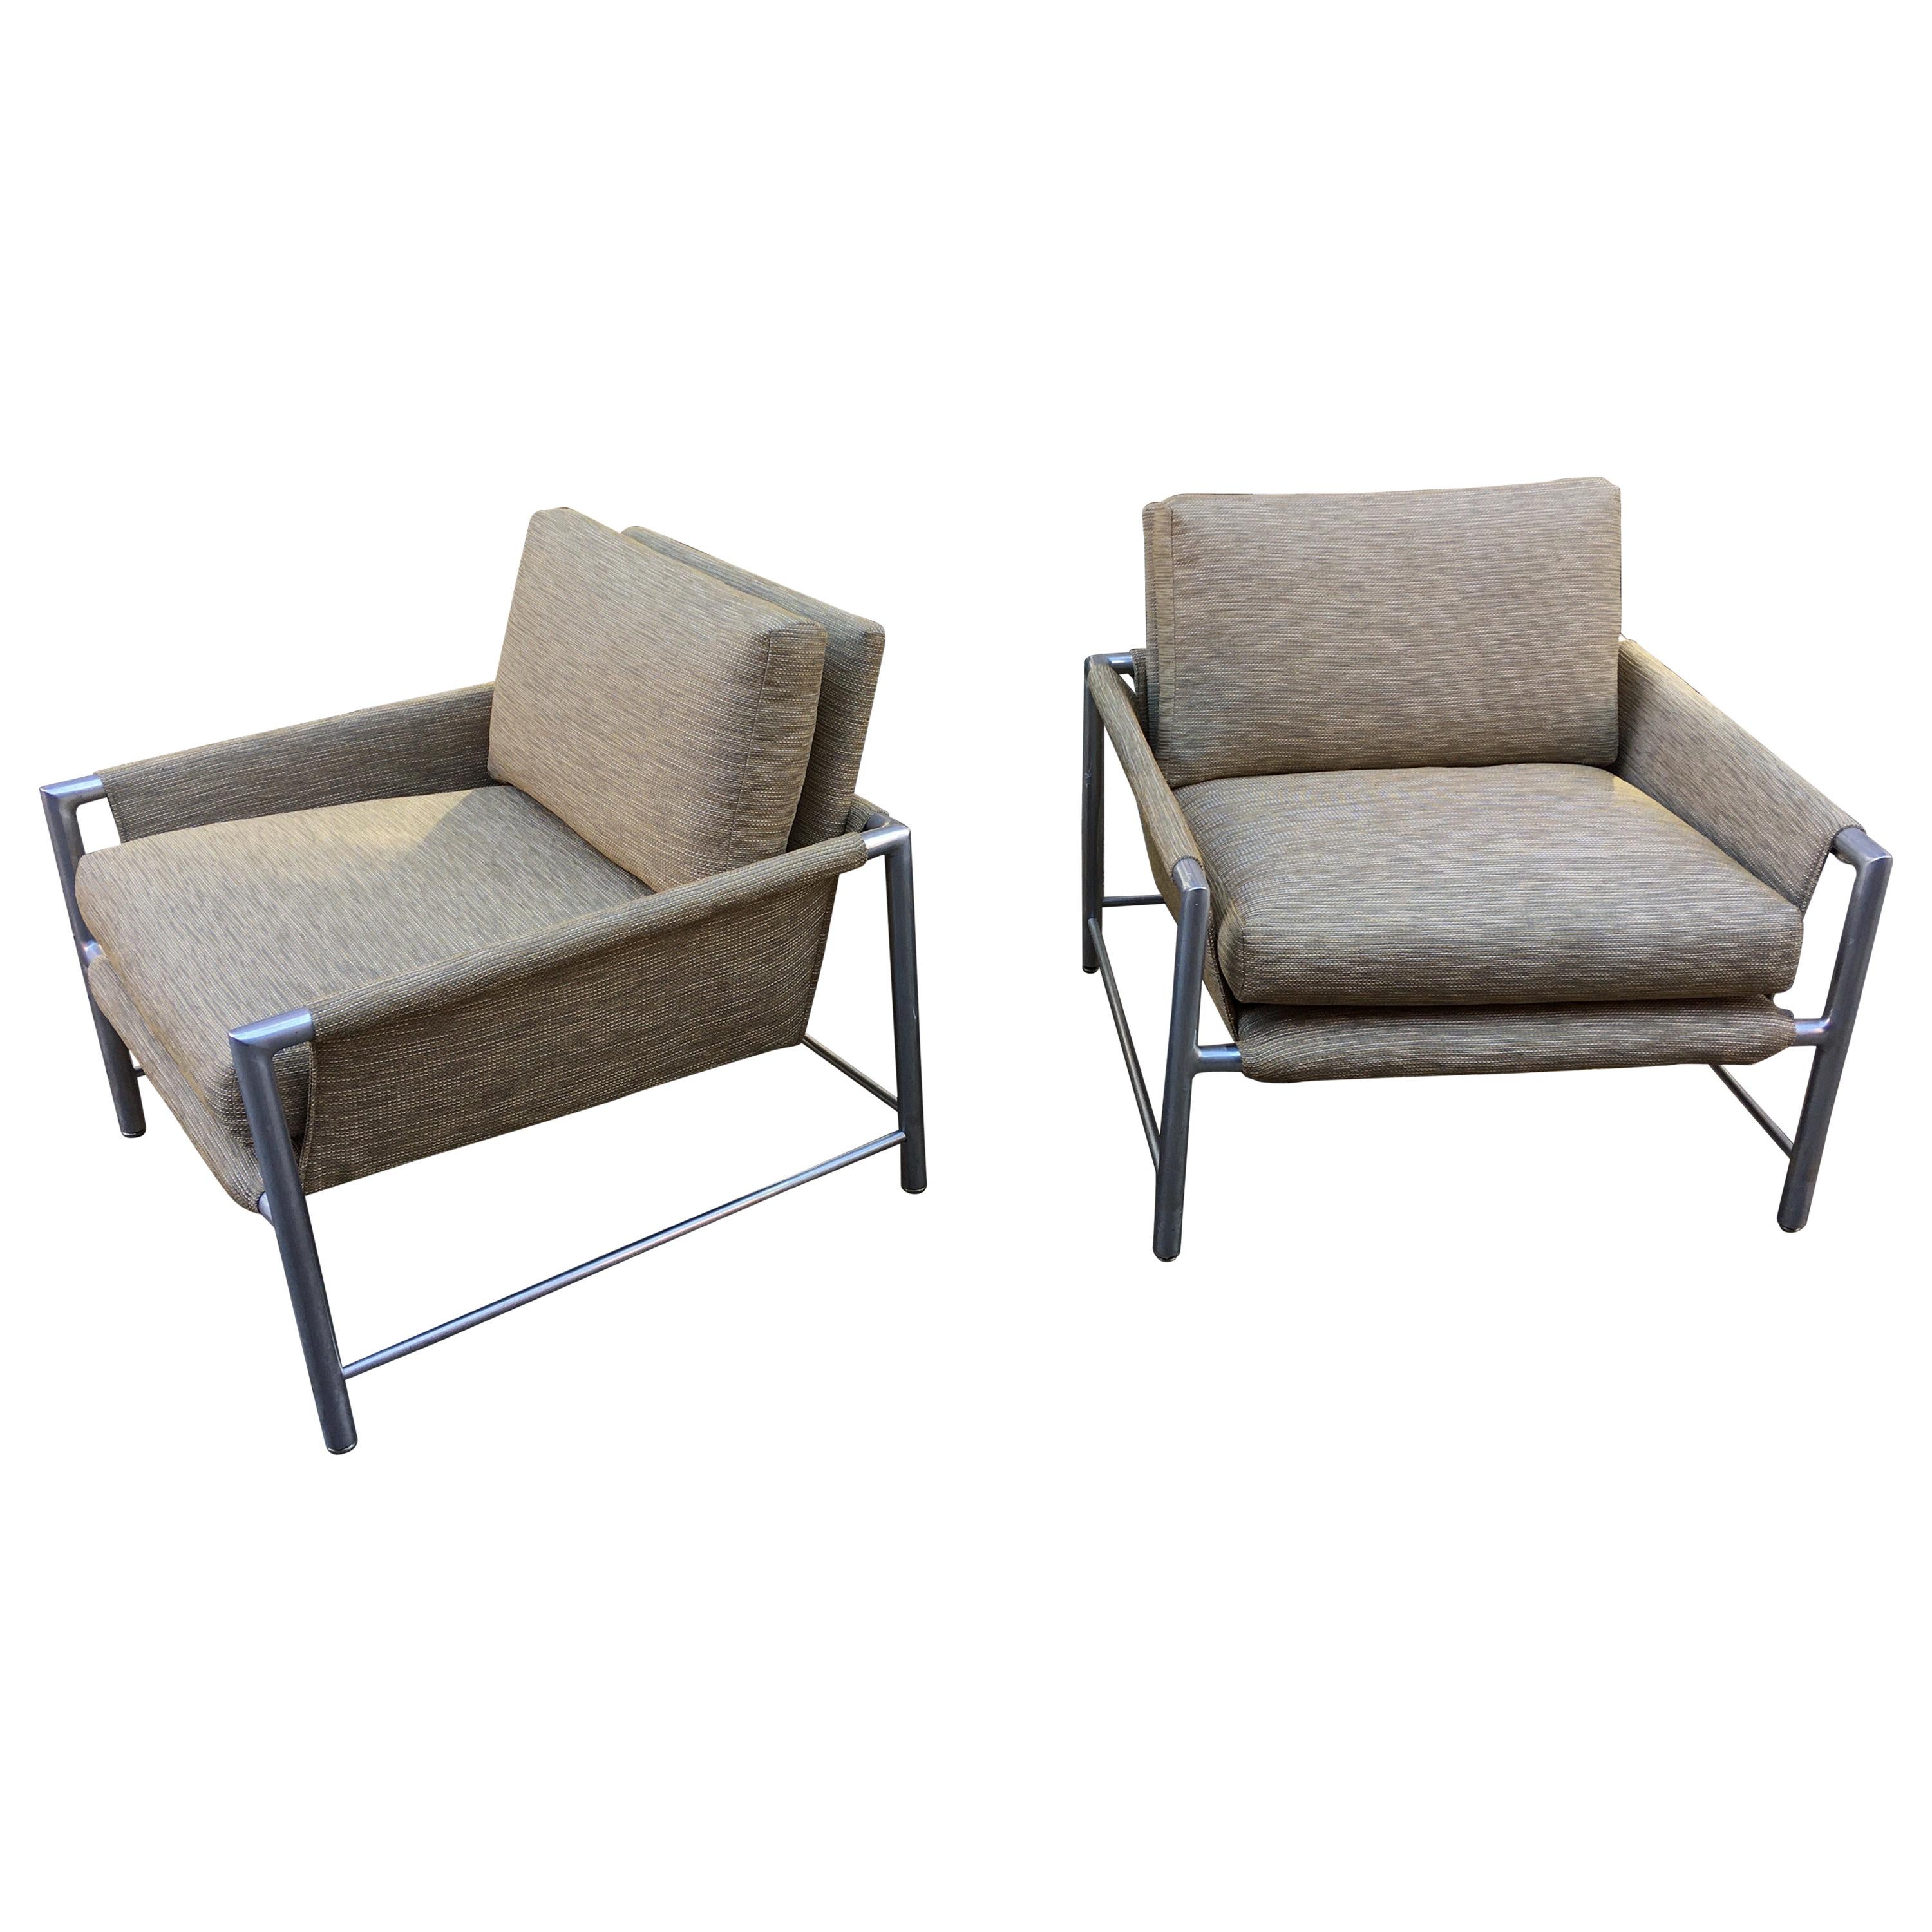 Pair of Founders Aluminum Lounge Chairs